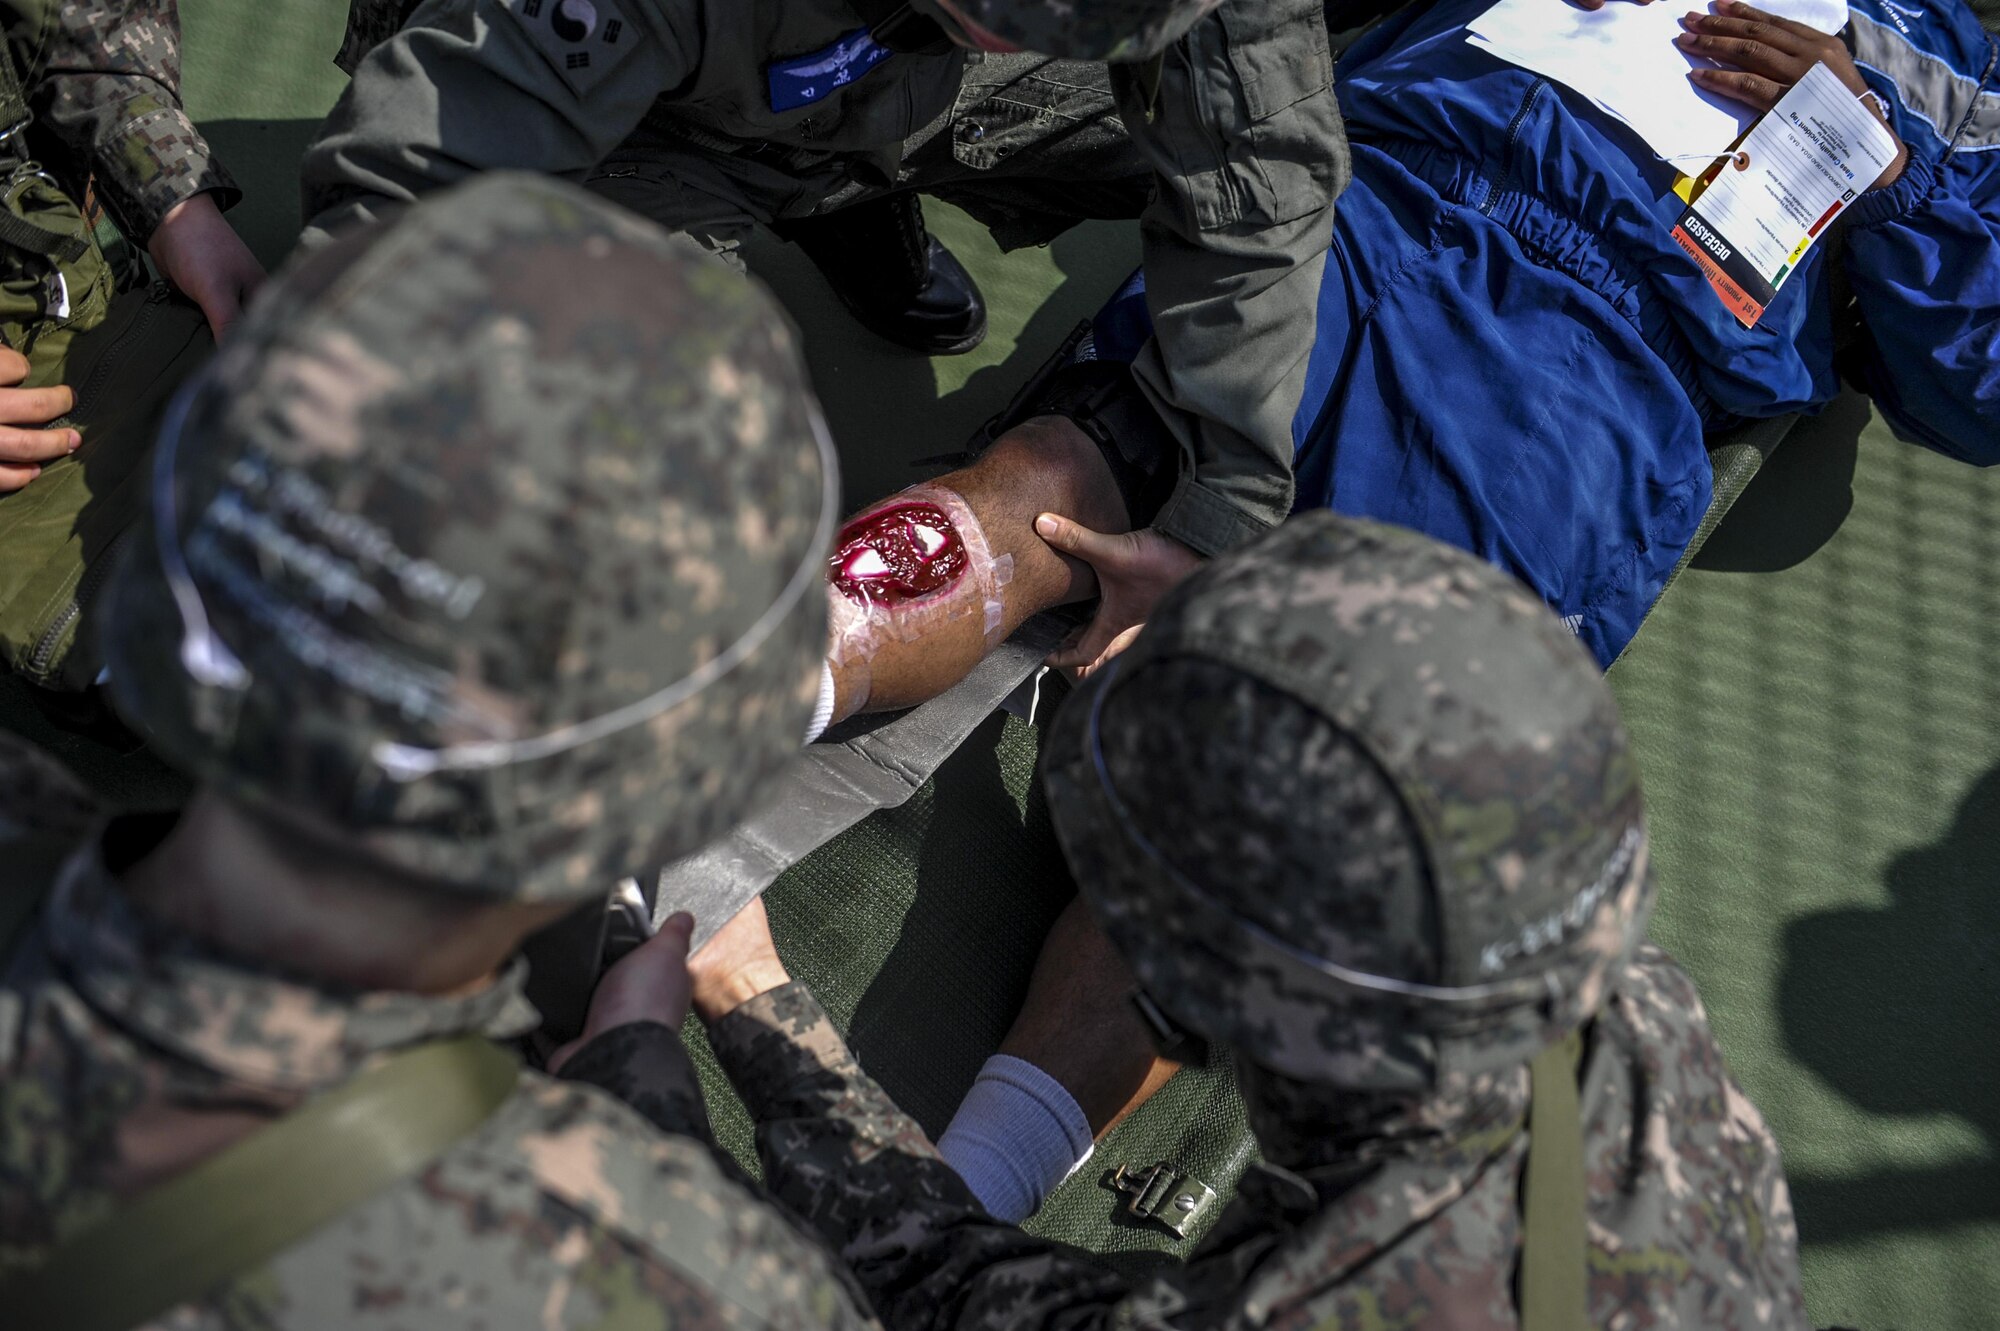 United States Air Force Staff Sgt. Devon Jefferies, 8th Medical Logistics Squadron medical technician, lies on a stretcher while receiving care from Republic of Korea Air Force airmen during a mass casualty exercise at Kunsan Air Base, Republic of Korea, April 19, 2017. U.S. and ROK airmen conducted the training to evaluate their ability to communicate and operate through a MASCAL situation. (U.S. Air Force photo by Senior Airman Colville McFee/Released)